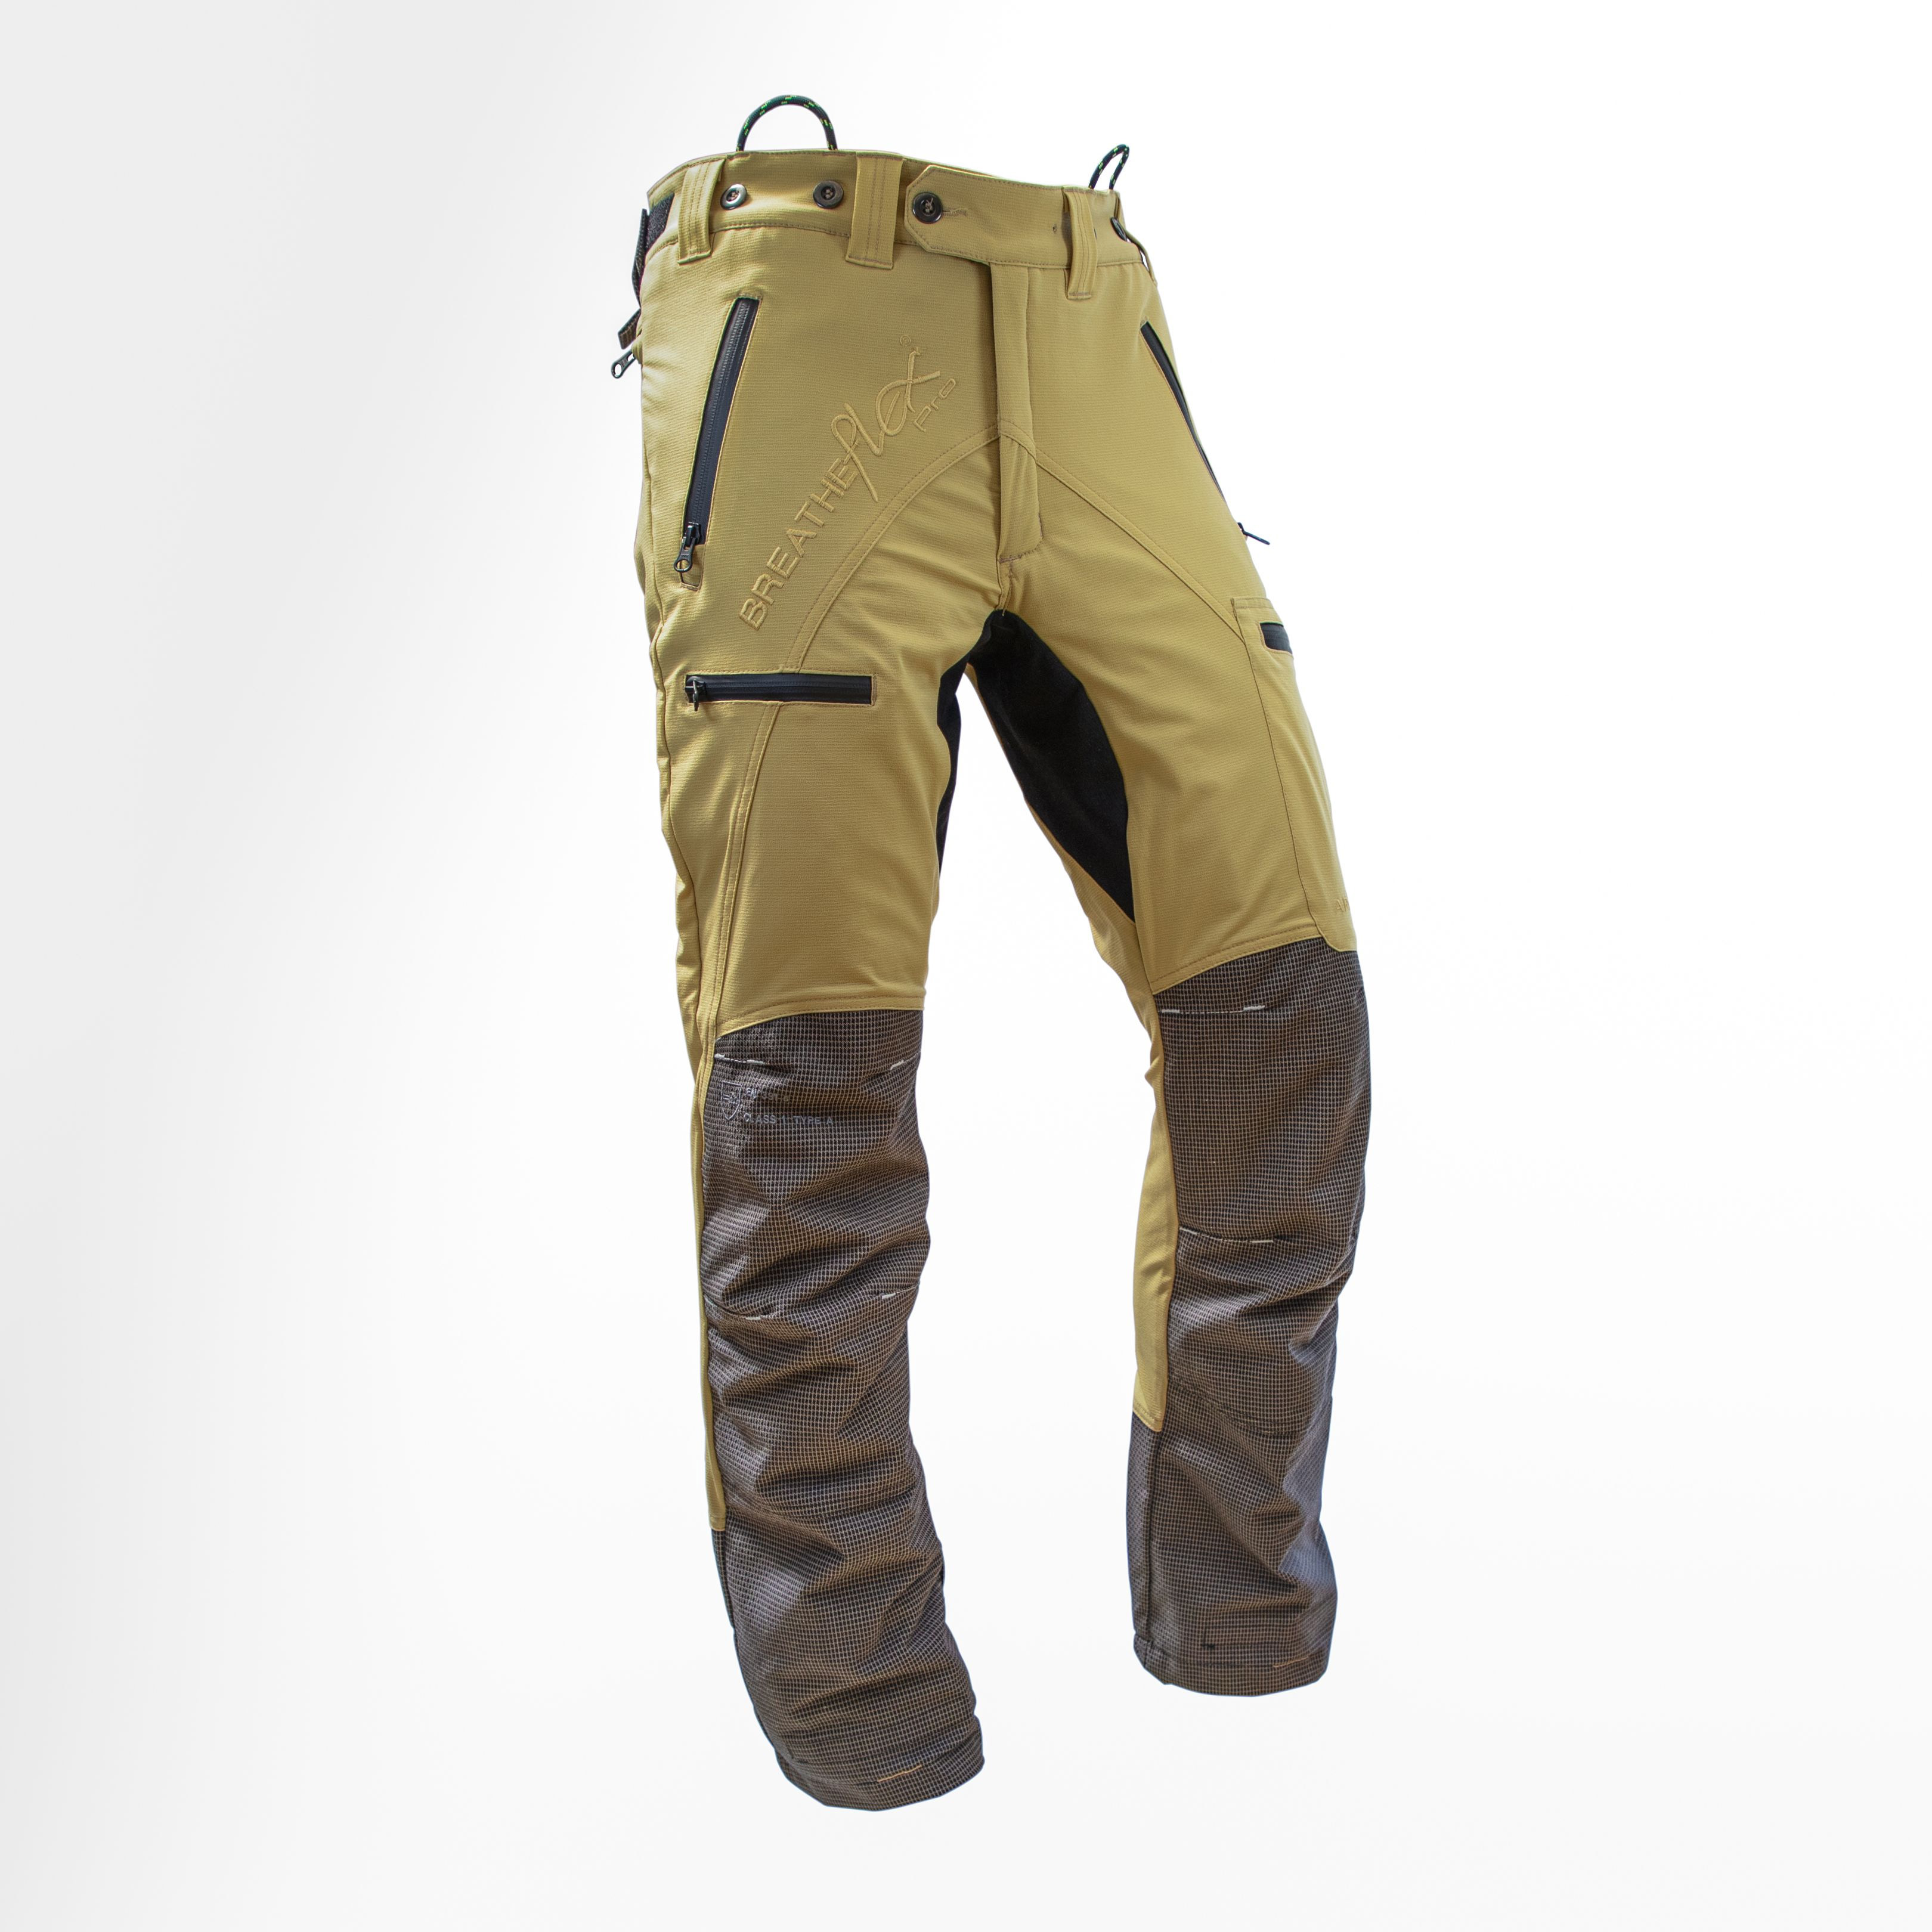 Arbortec AT4050F Womens Breatheflex Chainsaw Trouser Type C Class 1 Copy   All Clothing  Protection  Uniforms Workwear Specialist Equipment   PPE Suppliers